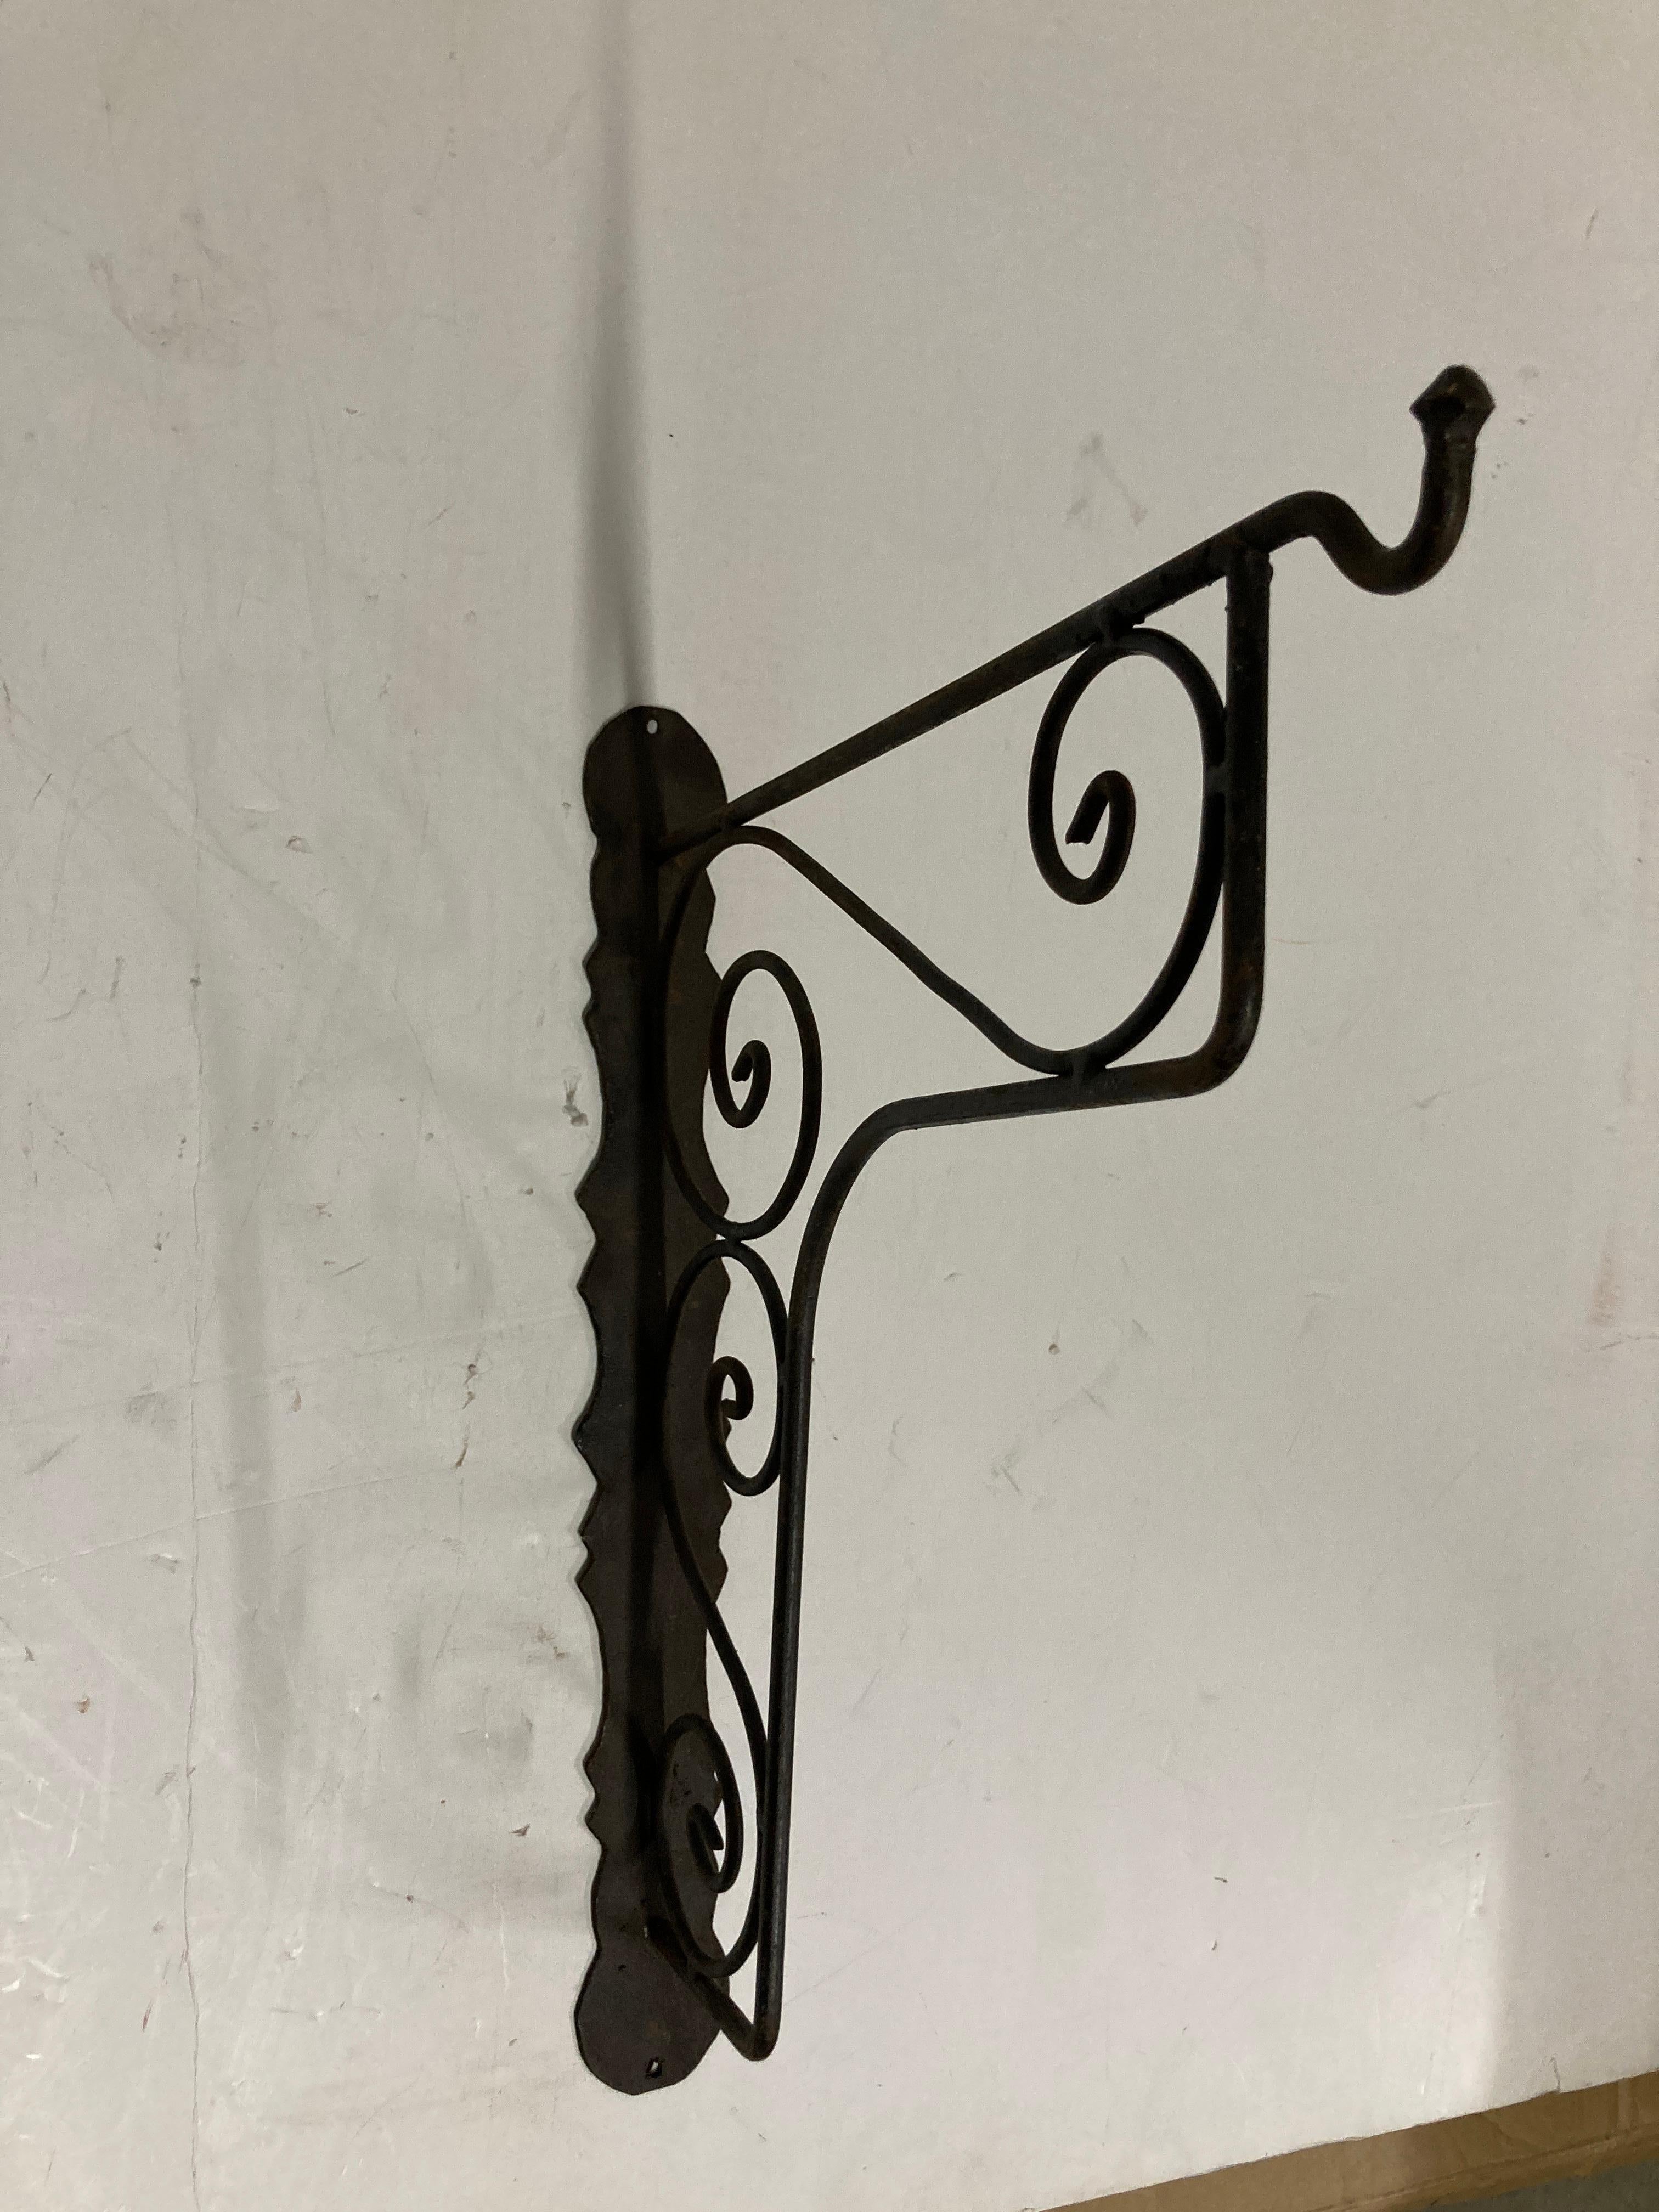 Large hand crafted iron scroll design wall bracket. 
Wrought iron handcrafted wall-bracket for lanterns or signs.
Perfect for hanging lights or plants outdoors.
Scrolling wall-mounted brackets.
Multiple available.
Dimensions: Projection: 15.25